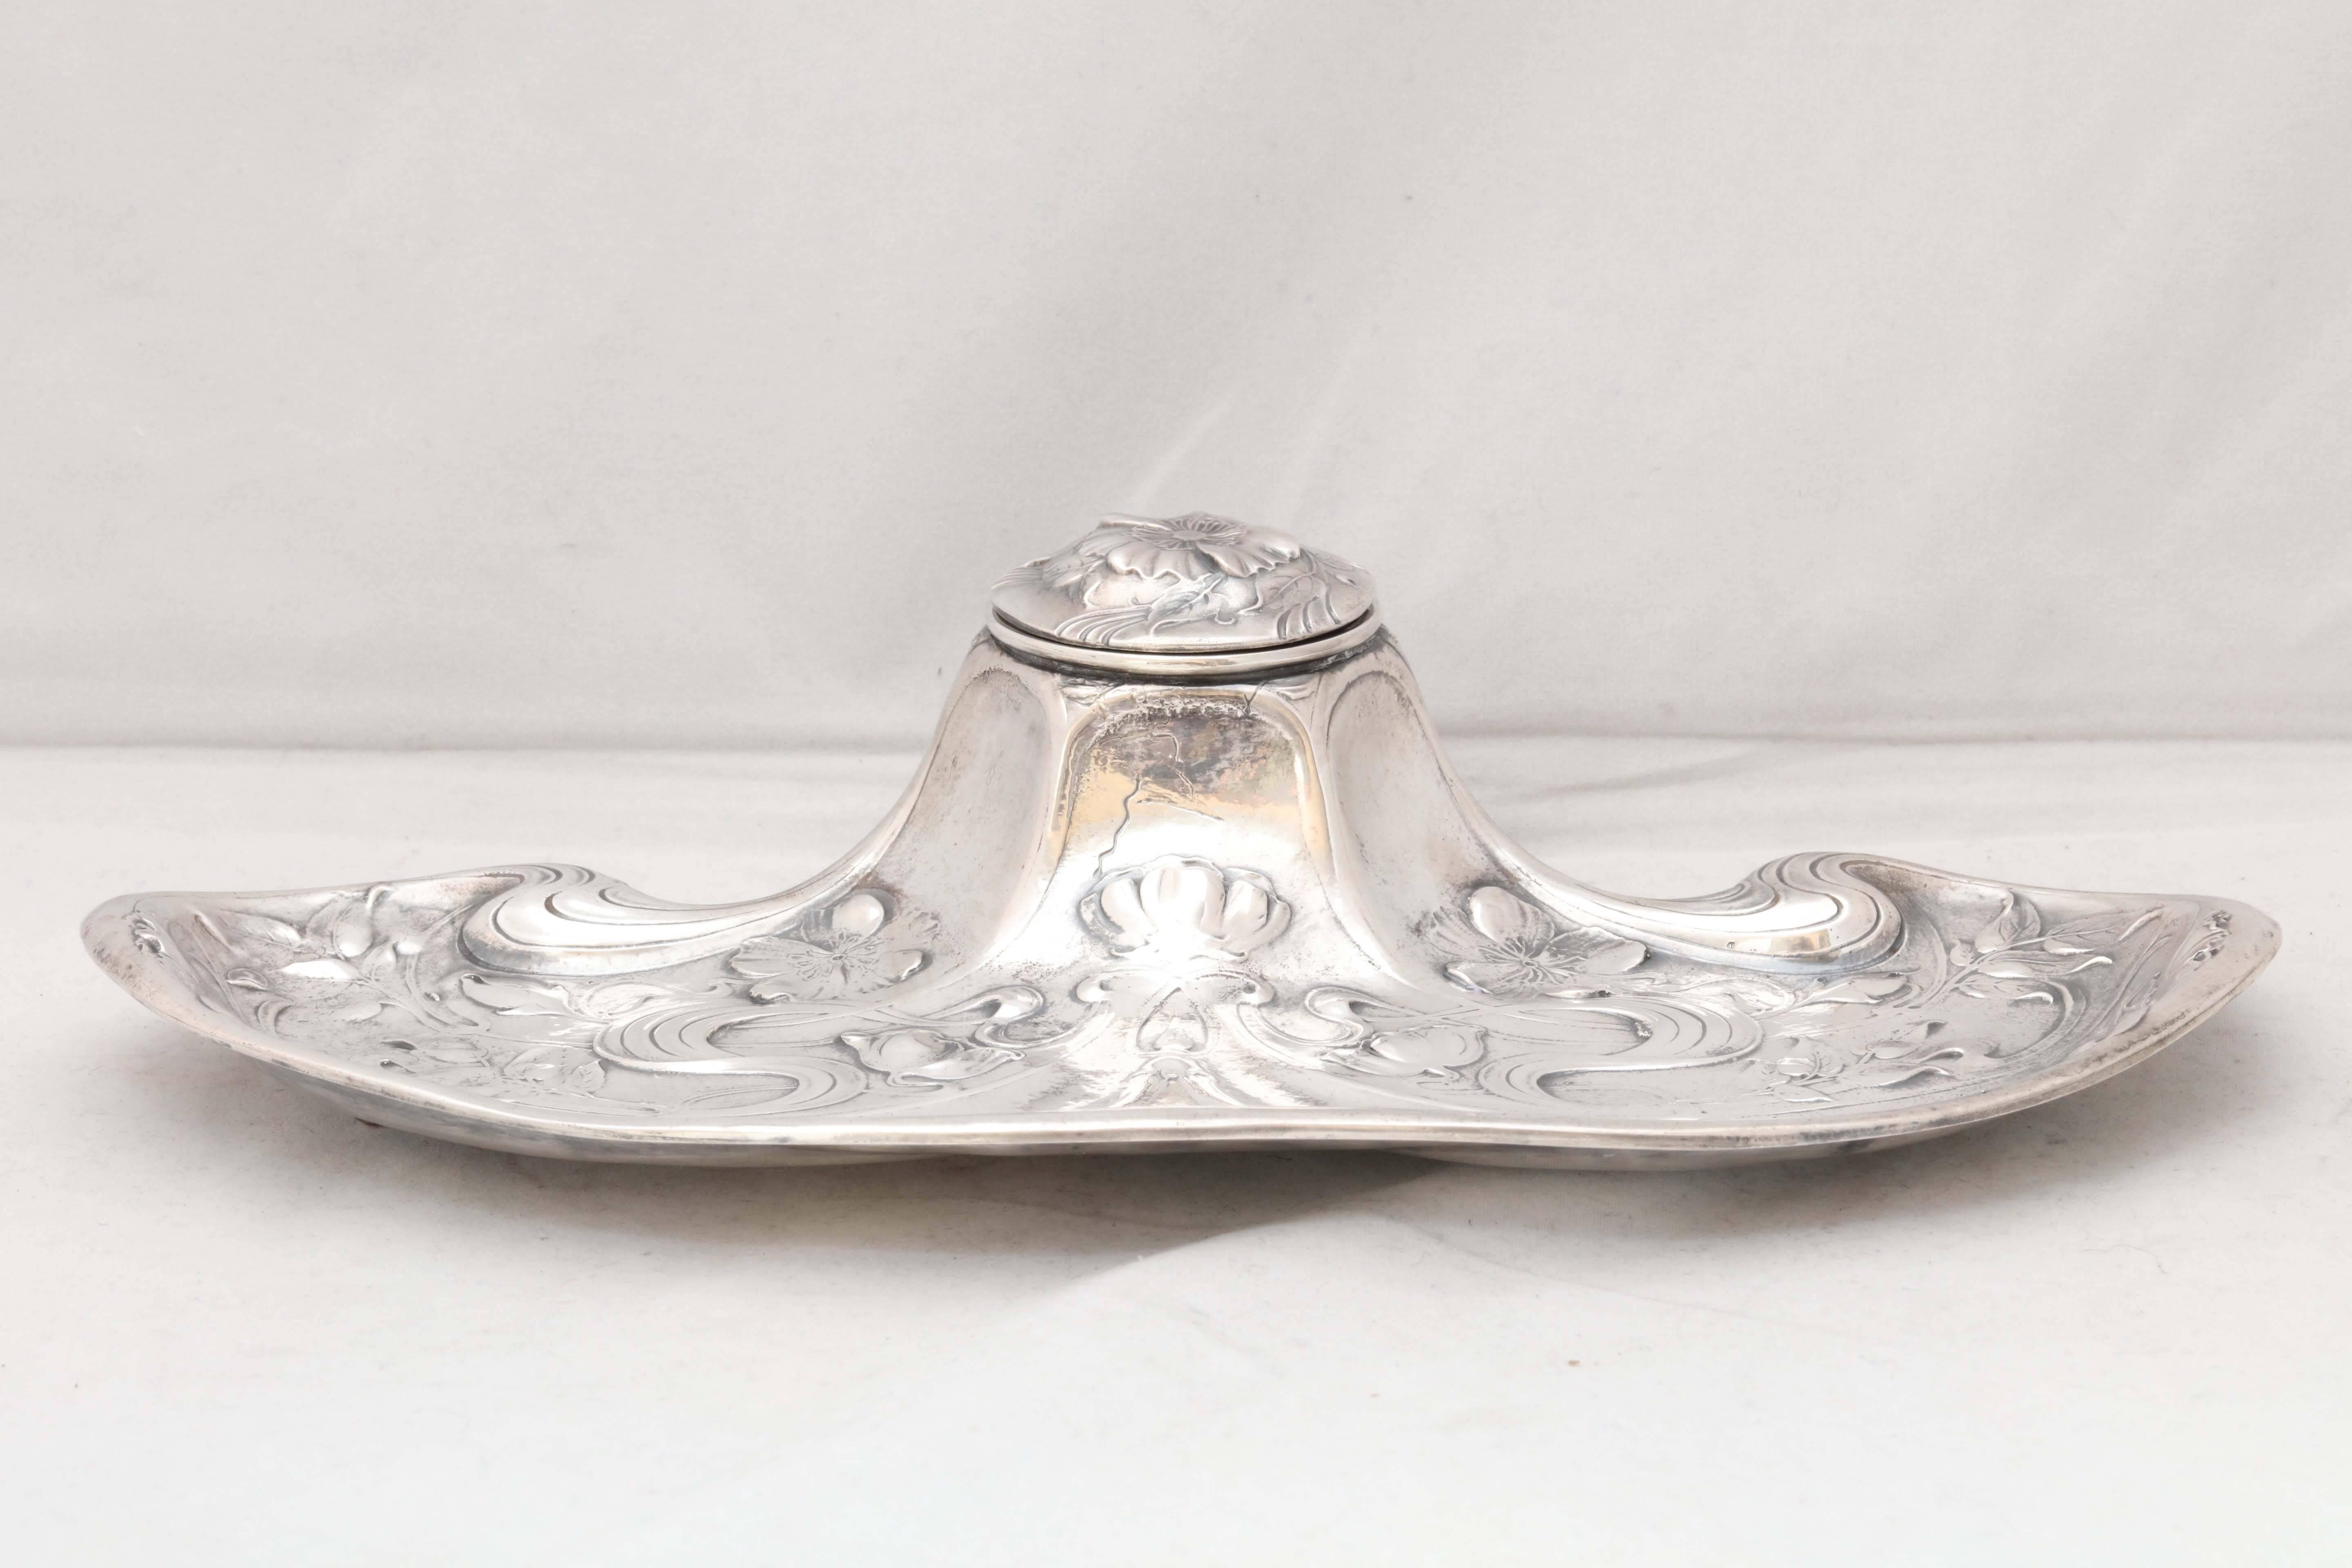 Rare Sterling Silver Art Nouveau Gorham Martele Footed Inkstand with Hinged Lid For Sale 4